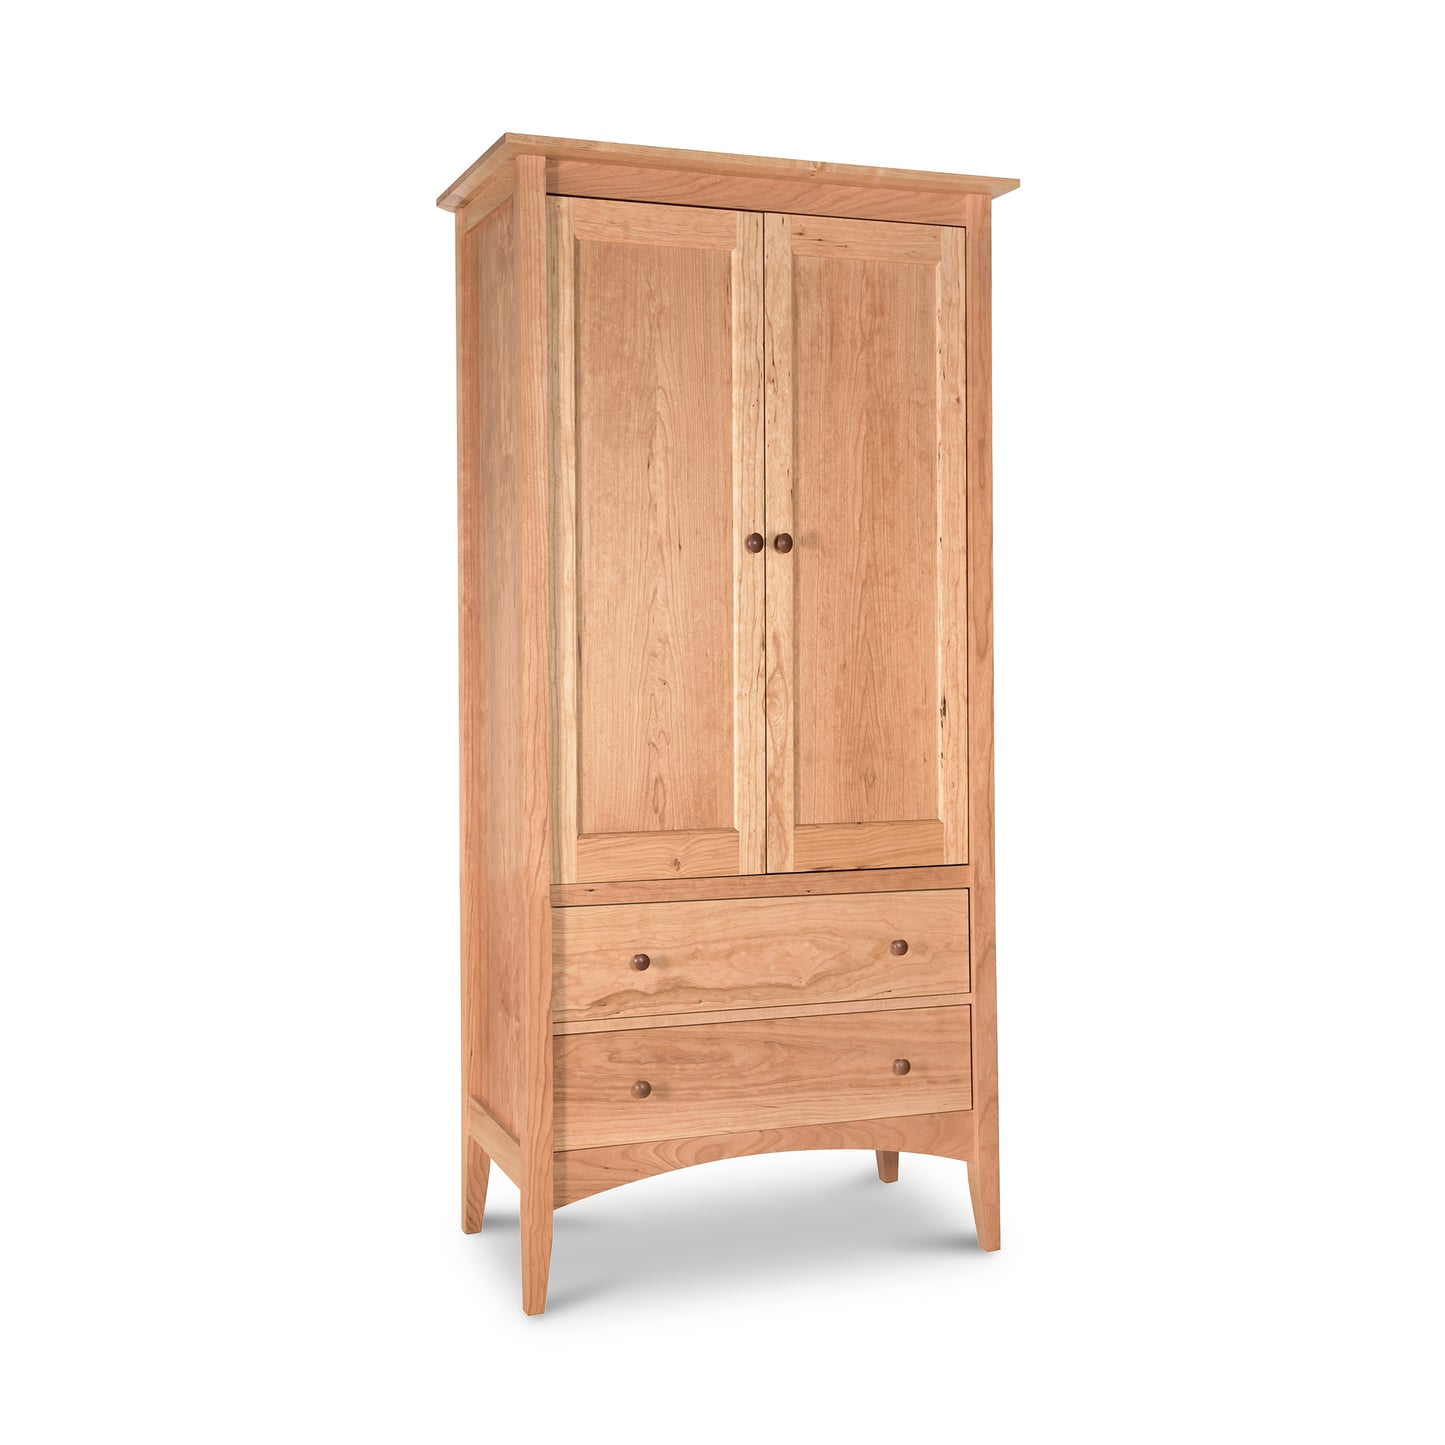 A Maple Corner Woodworks American Shaker Armoire with two doors above and two drawers below, isolated on a white background.